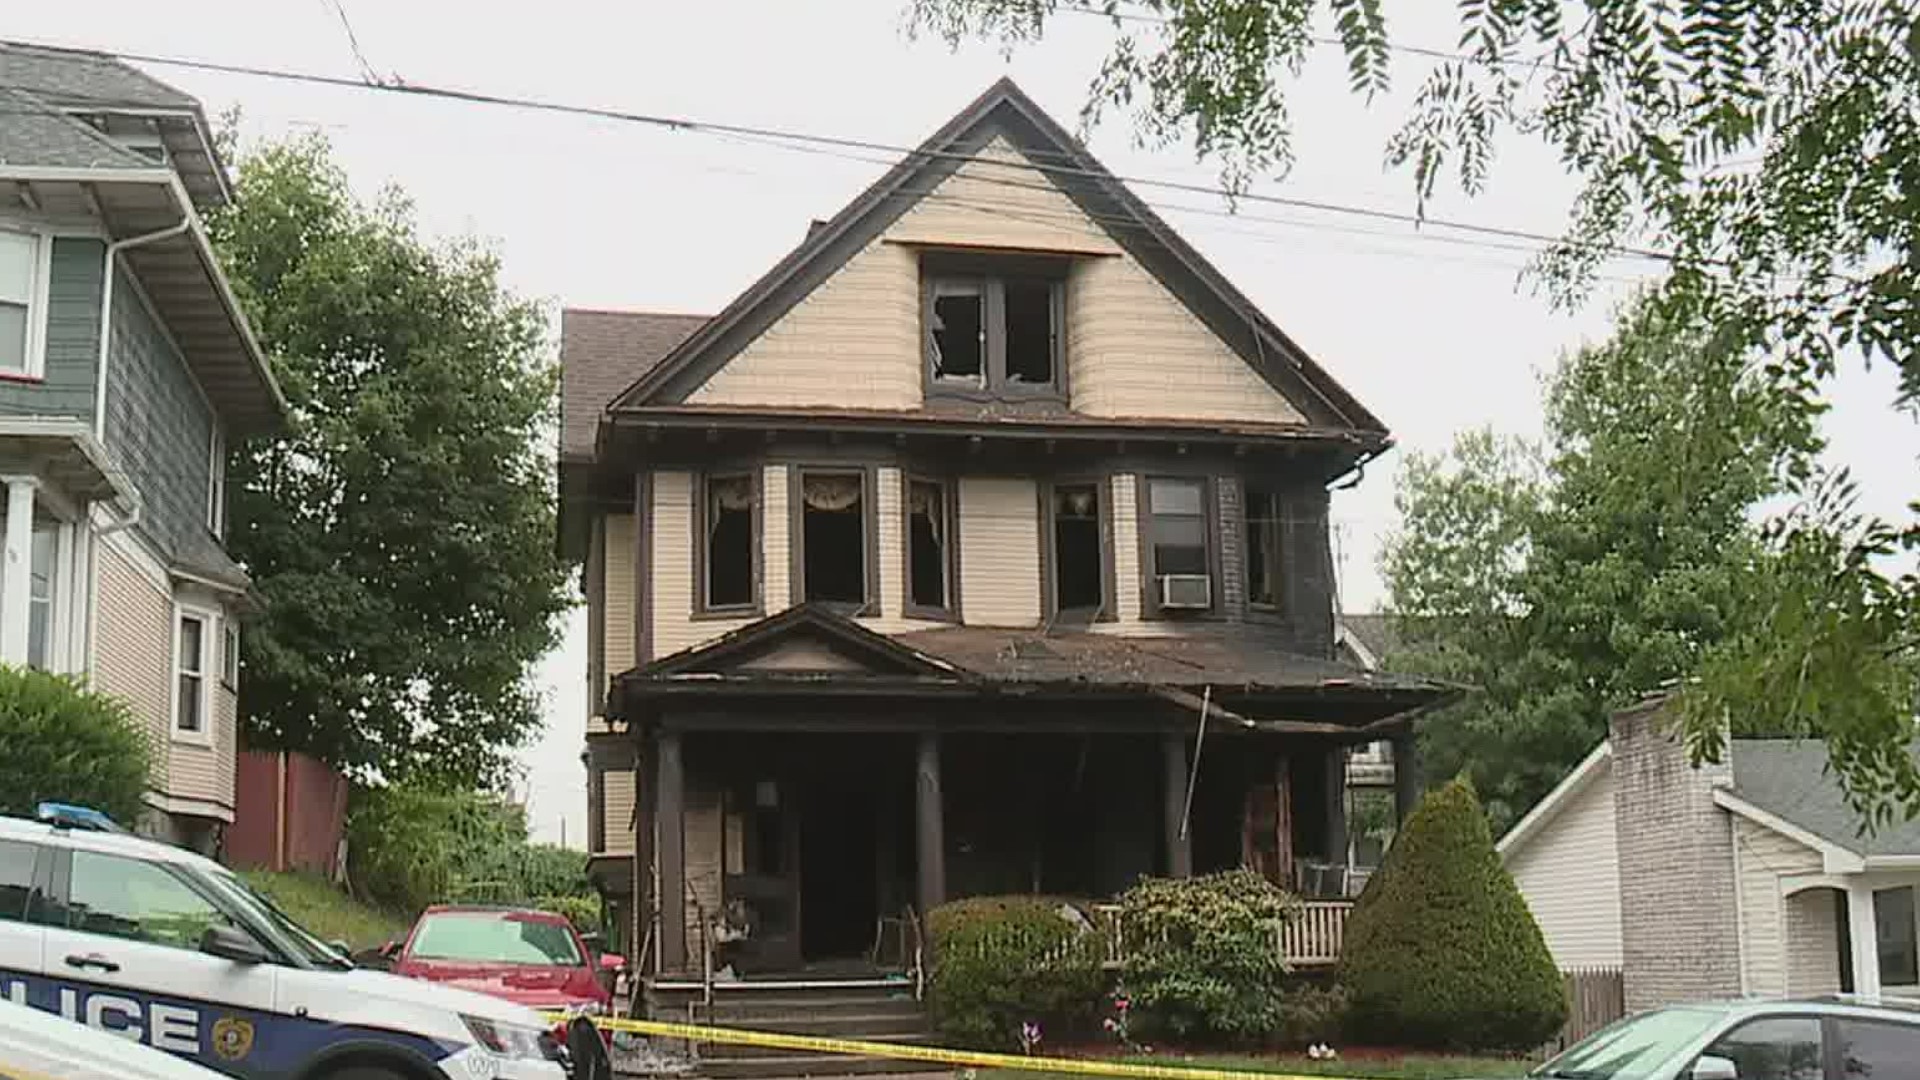 A fire in Scranton Friday night claimed the life of one woman and injured a man. Neighbors reacted to the scene Saturday.